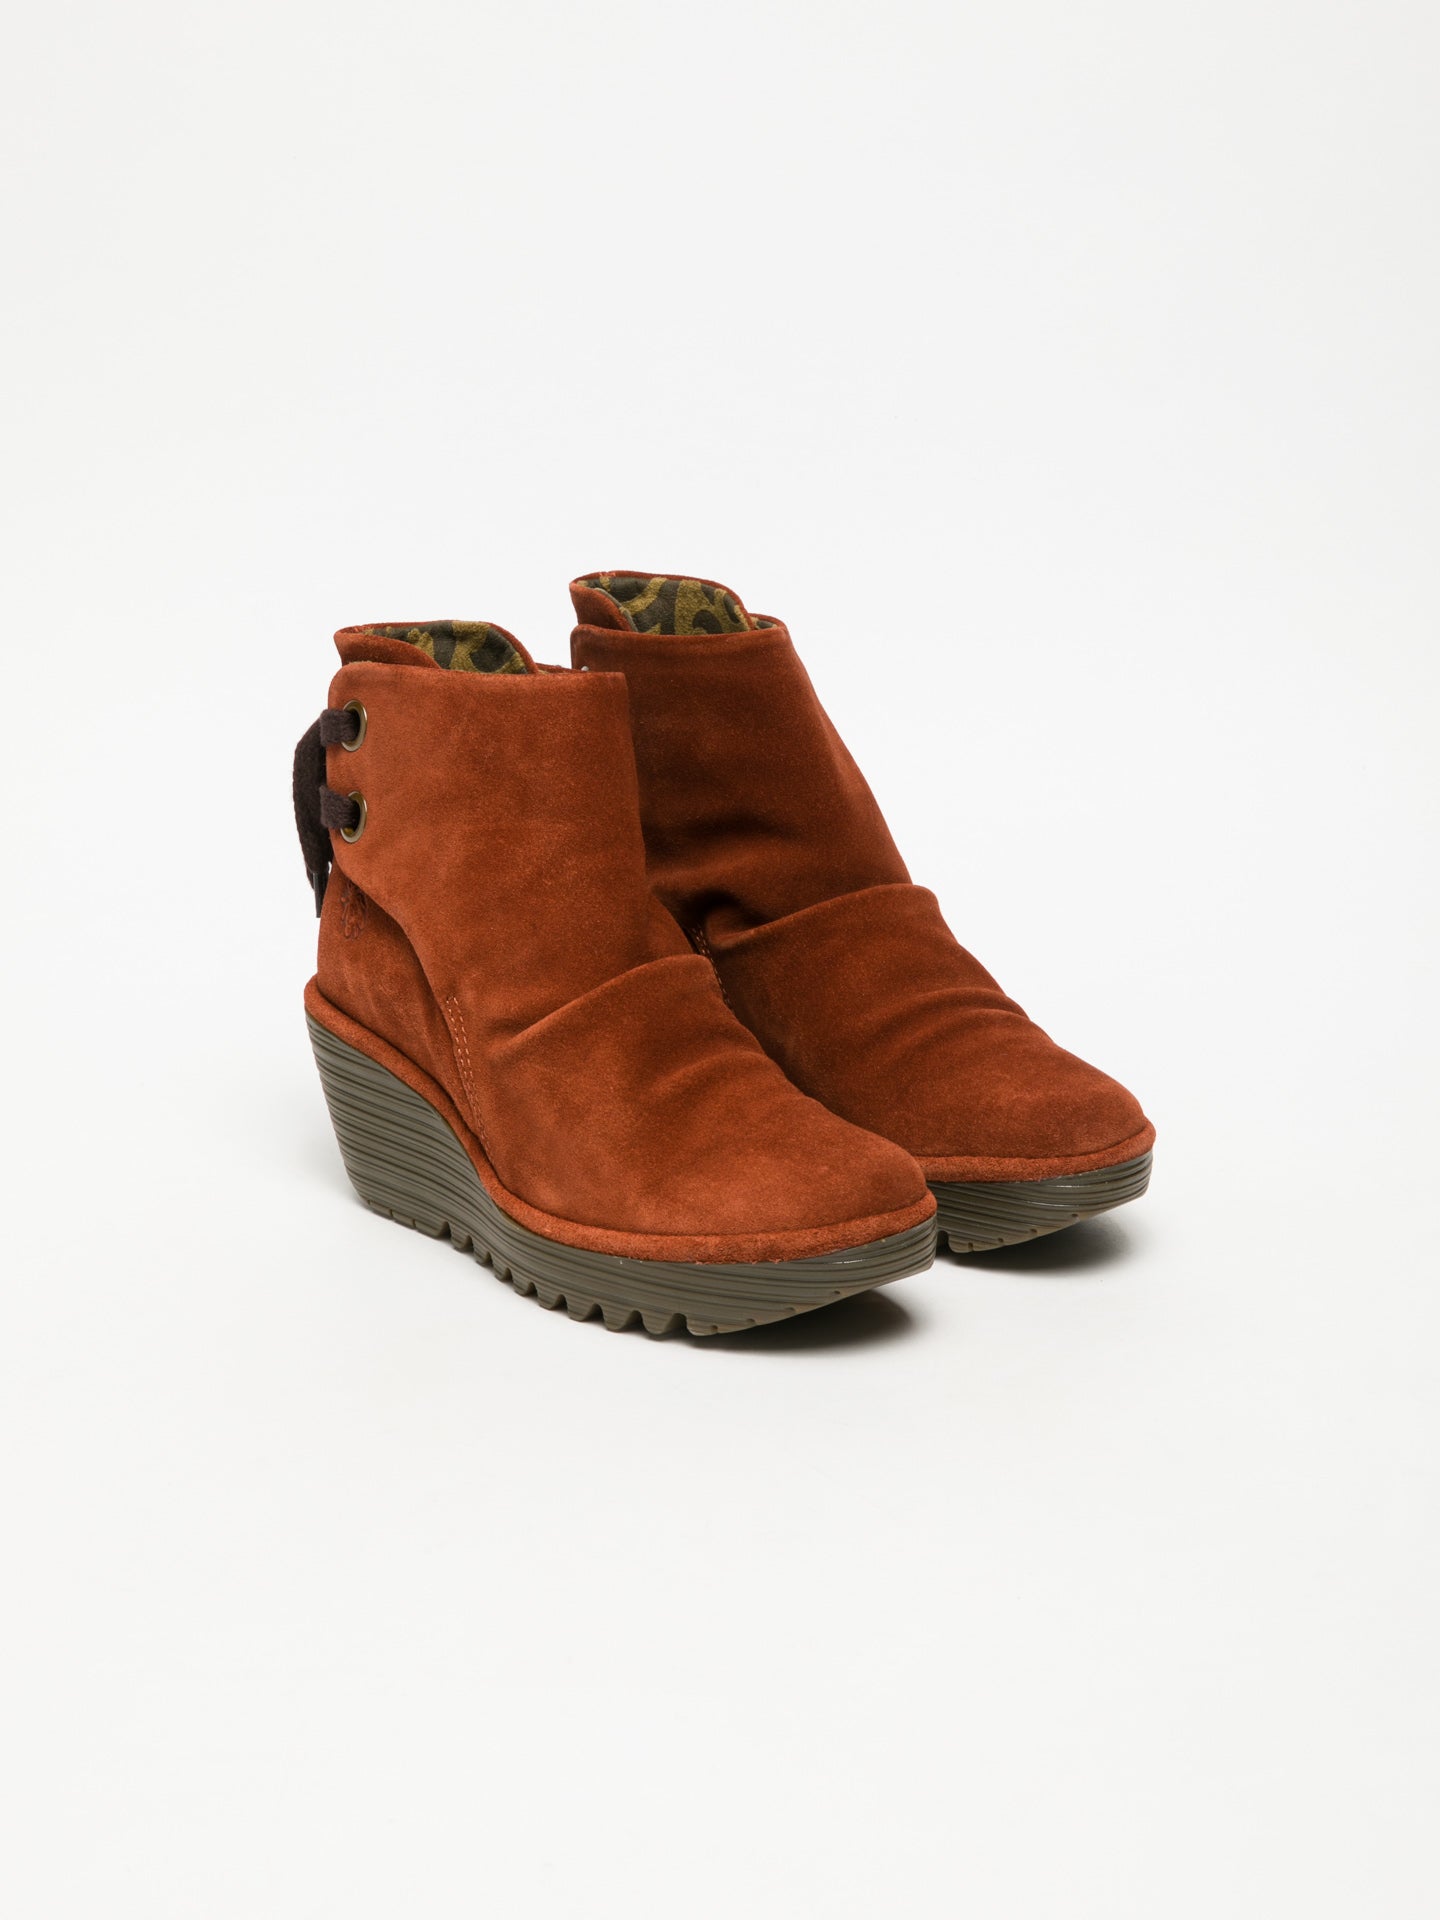 Fly London Firebrick Wedge Ankle Boots